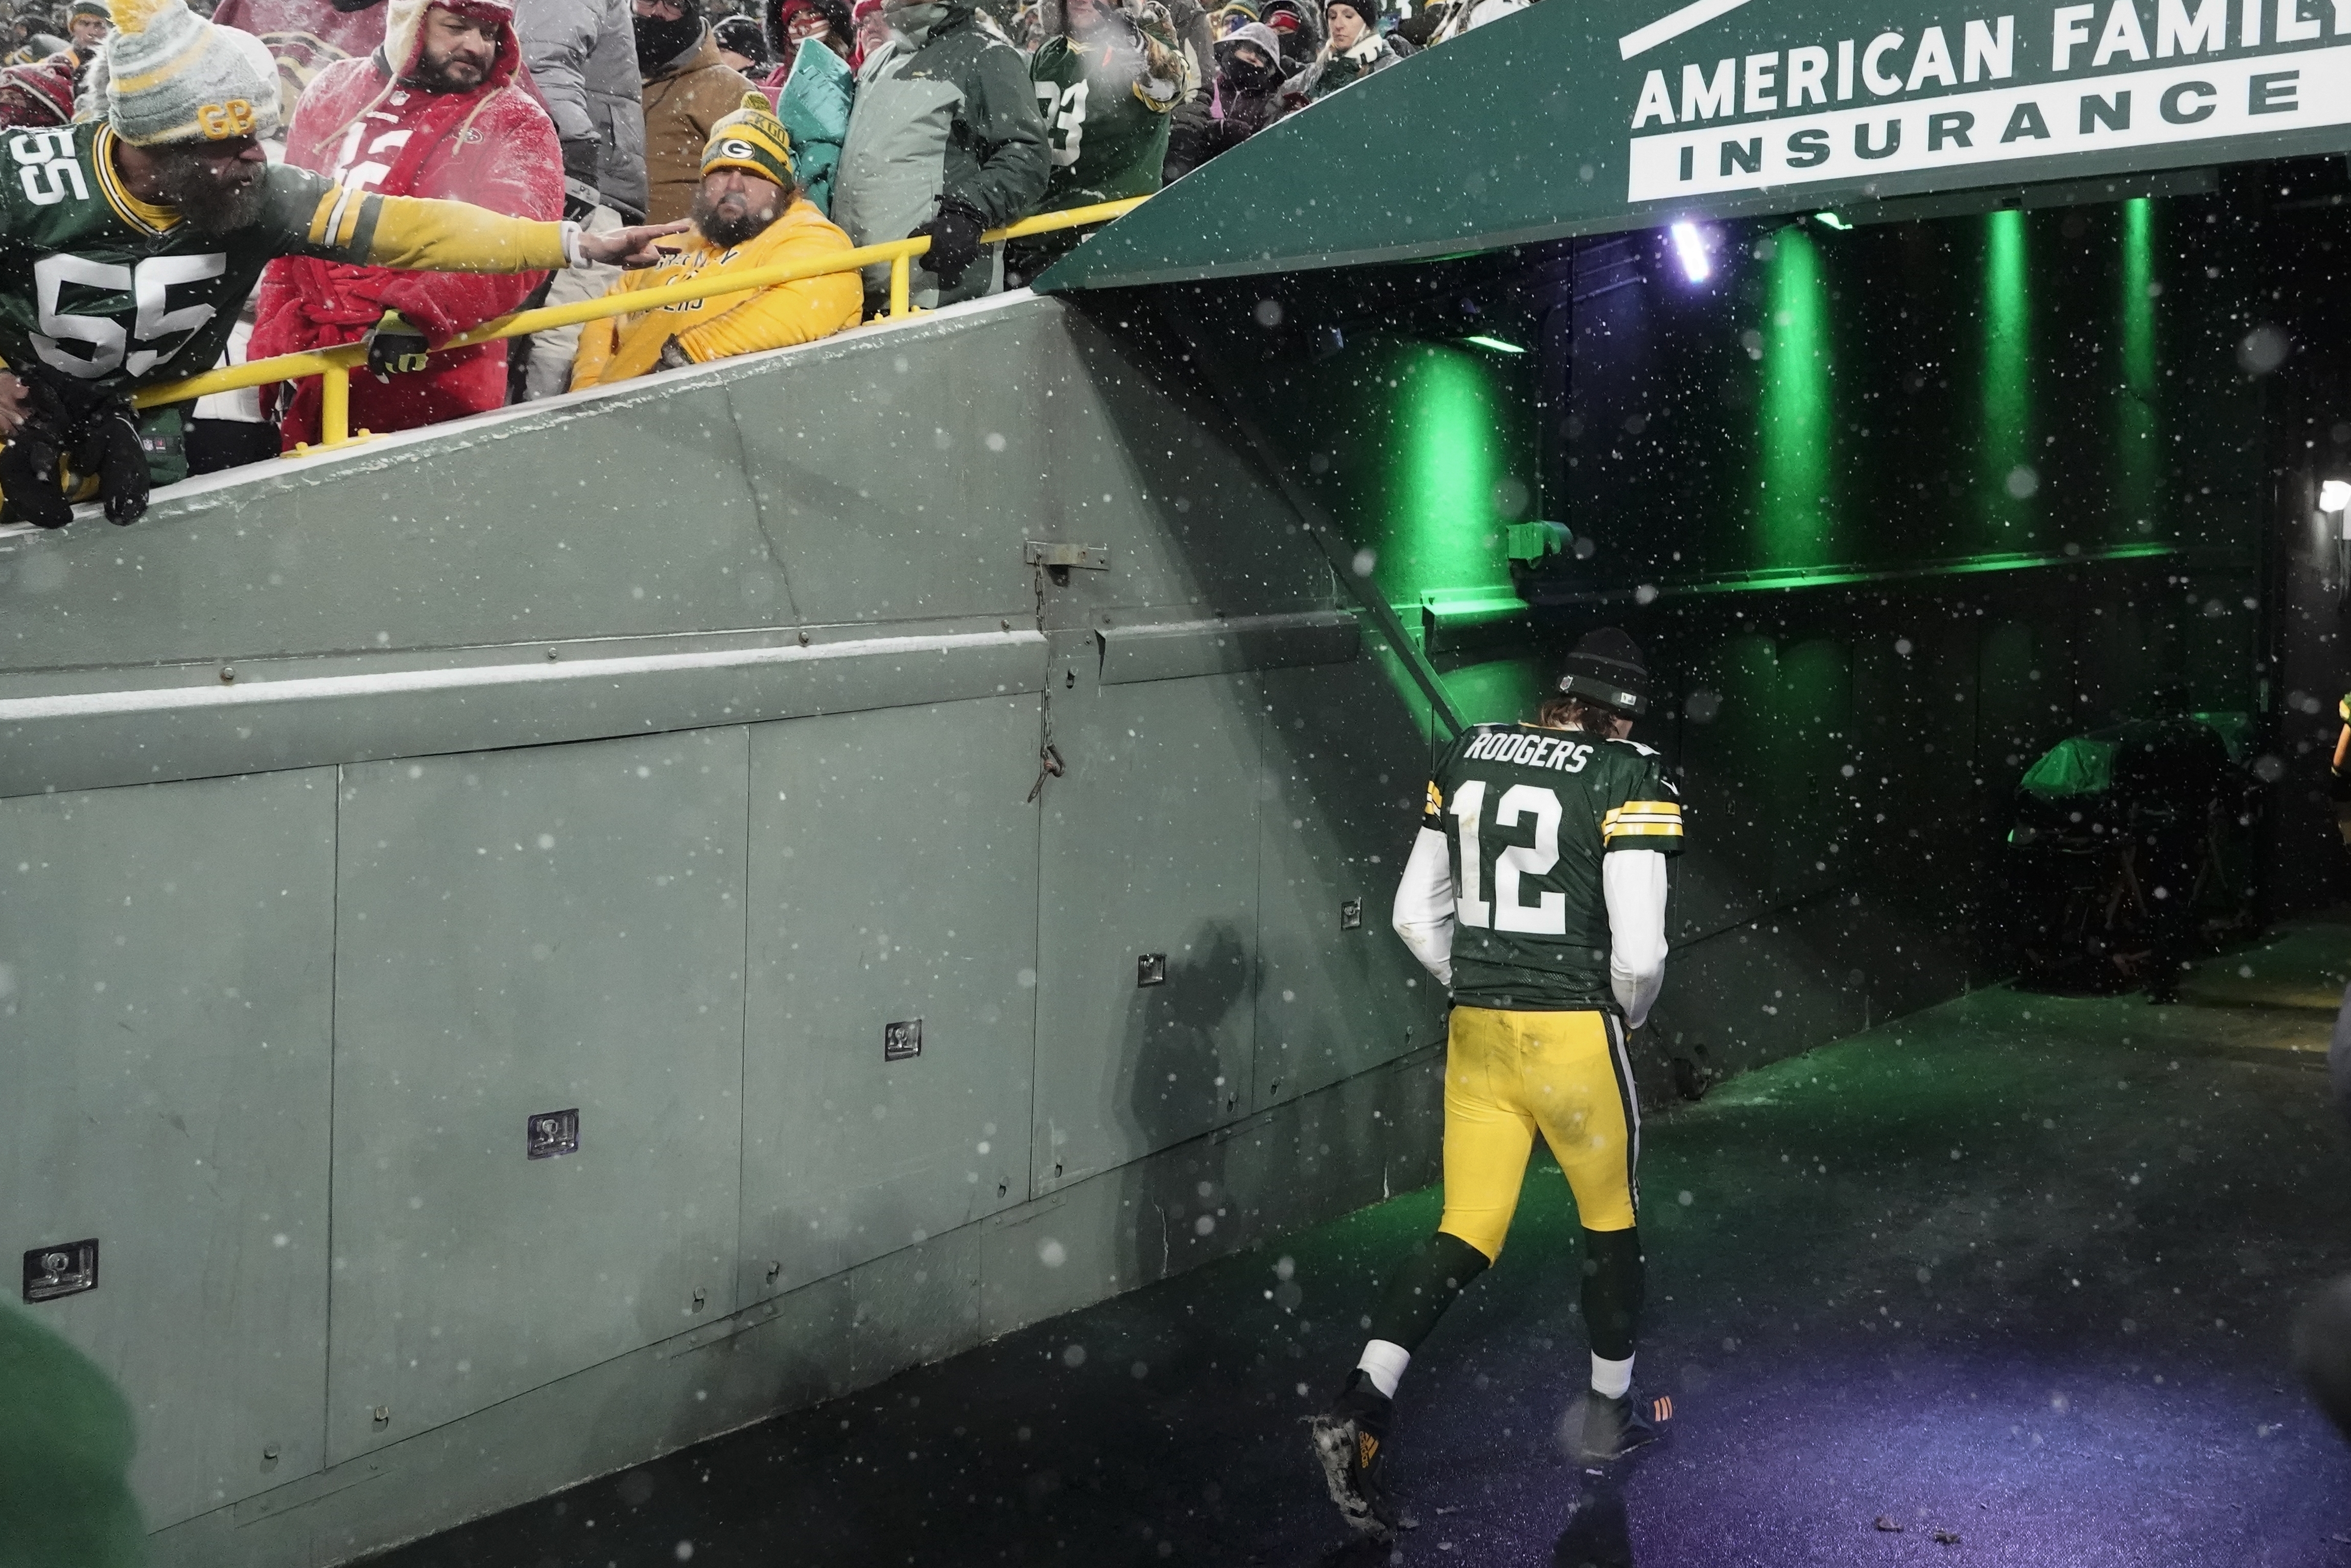 BR: Packers audio clip 